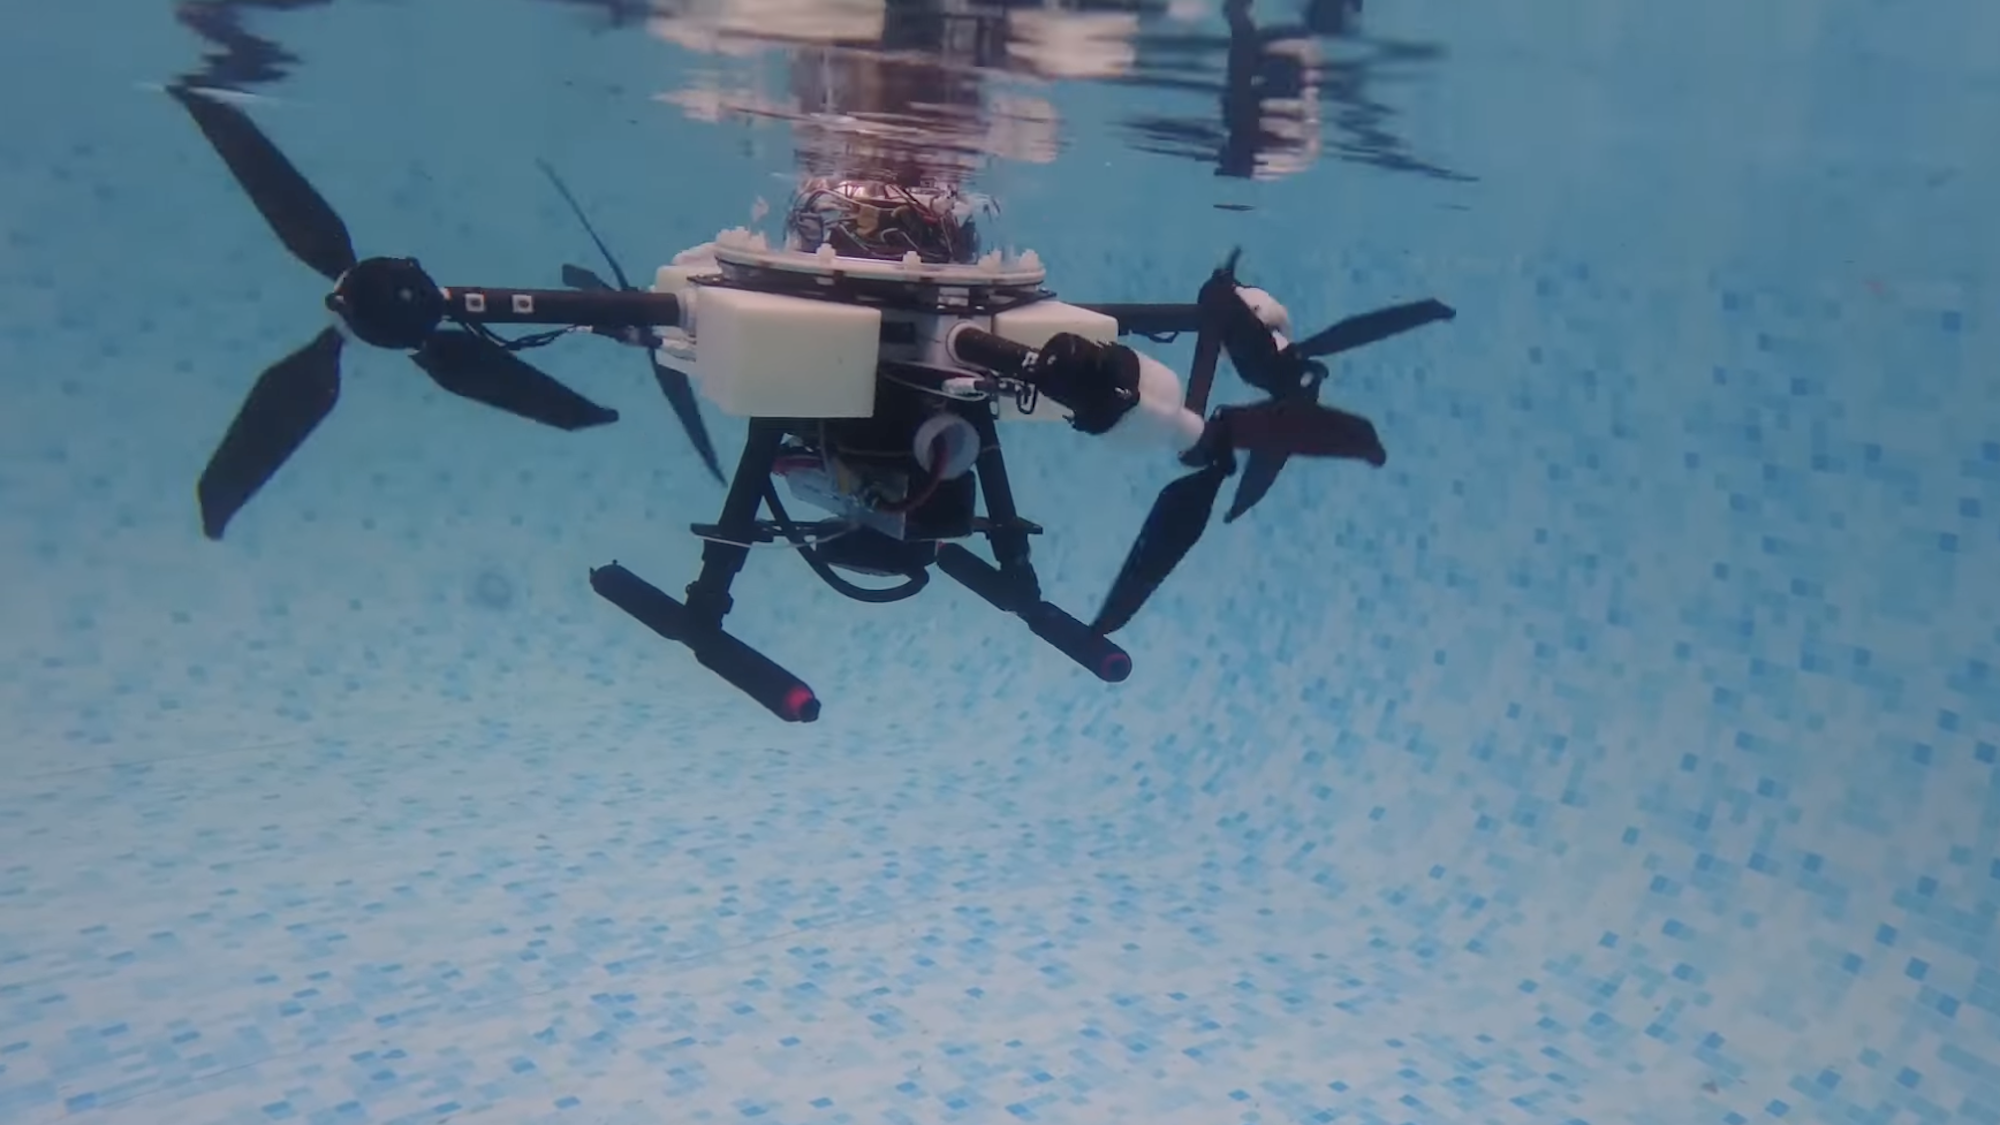 Quadcopter drone propelling itself underwater in swimming pool